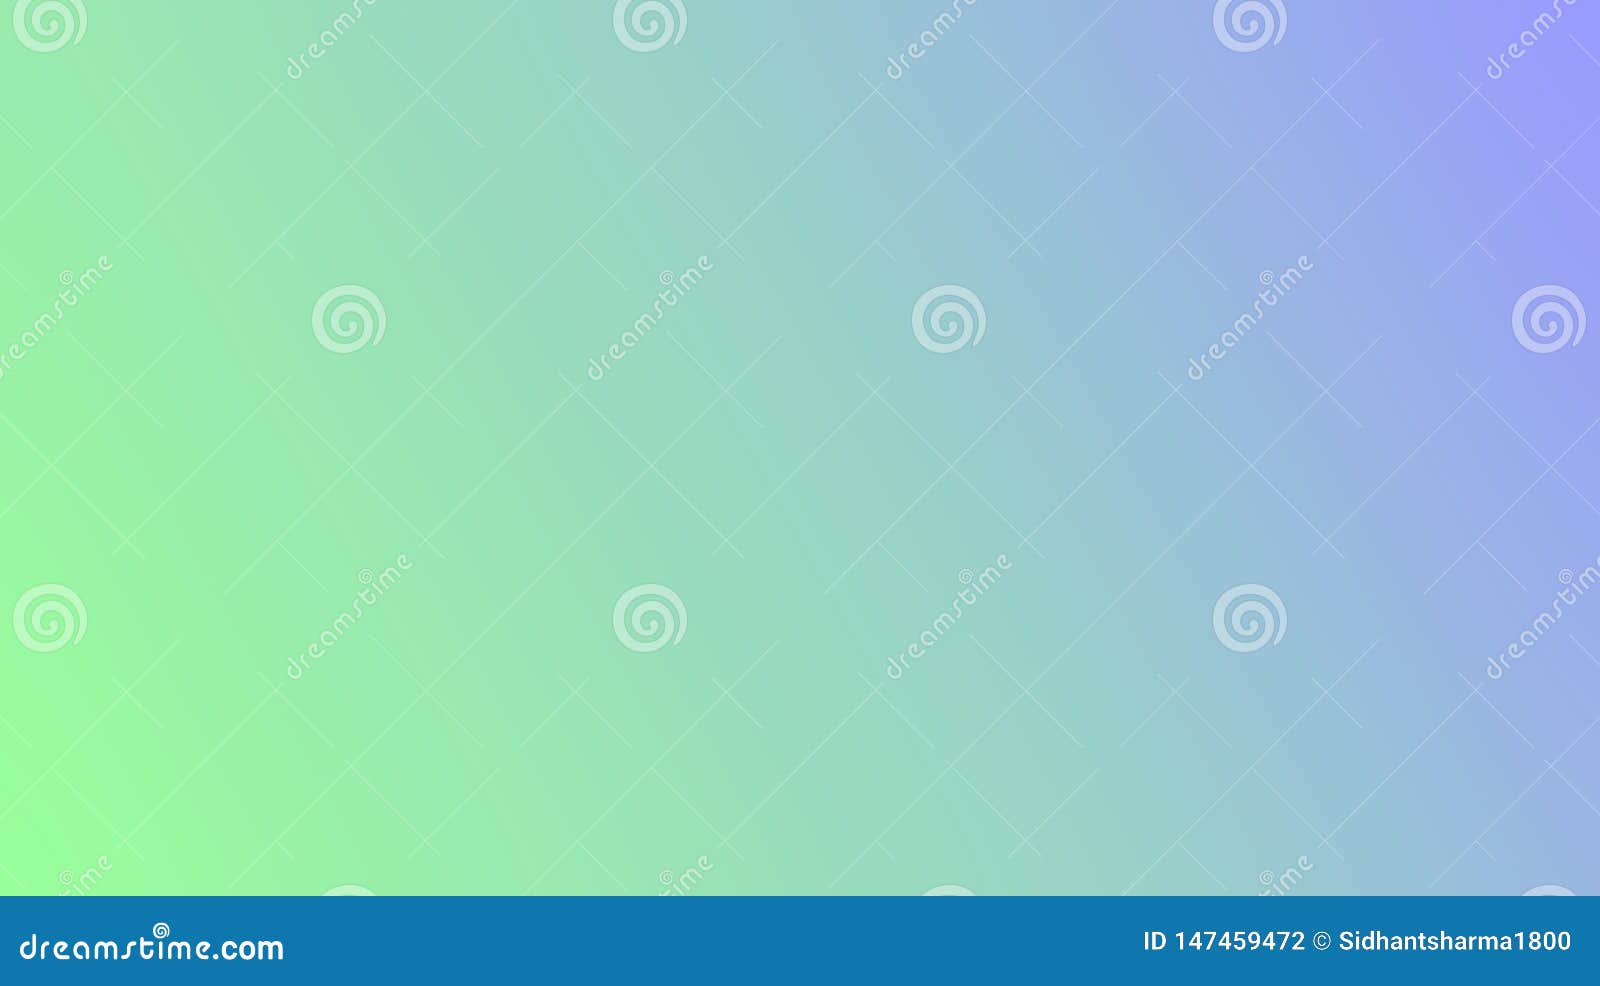 colorful abstract blurred shaded pastel blue mint green multi color effects background.